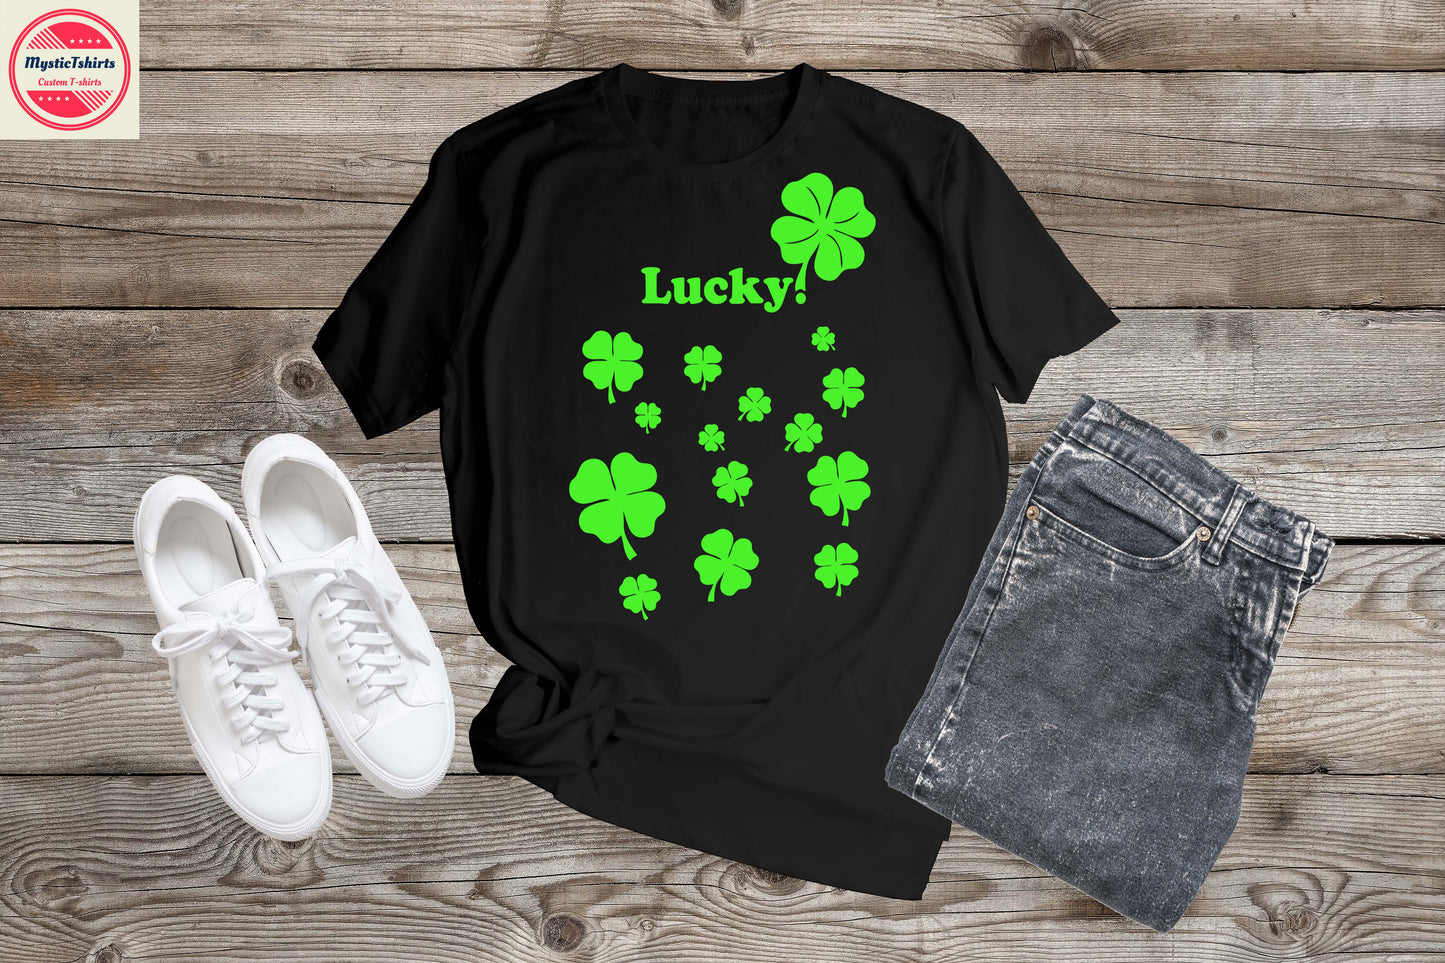 315. LUCKY CLOVERS, Custom Made Shirt, Personalized T-Shirt, Custom Text, Make Your Own Shirt, Custom Tee